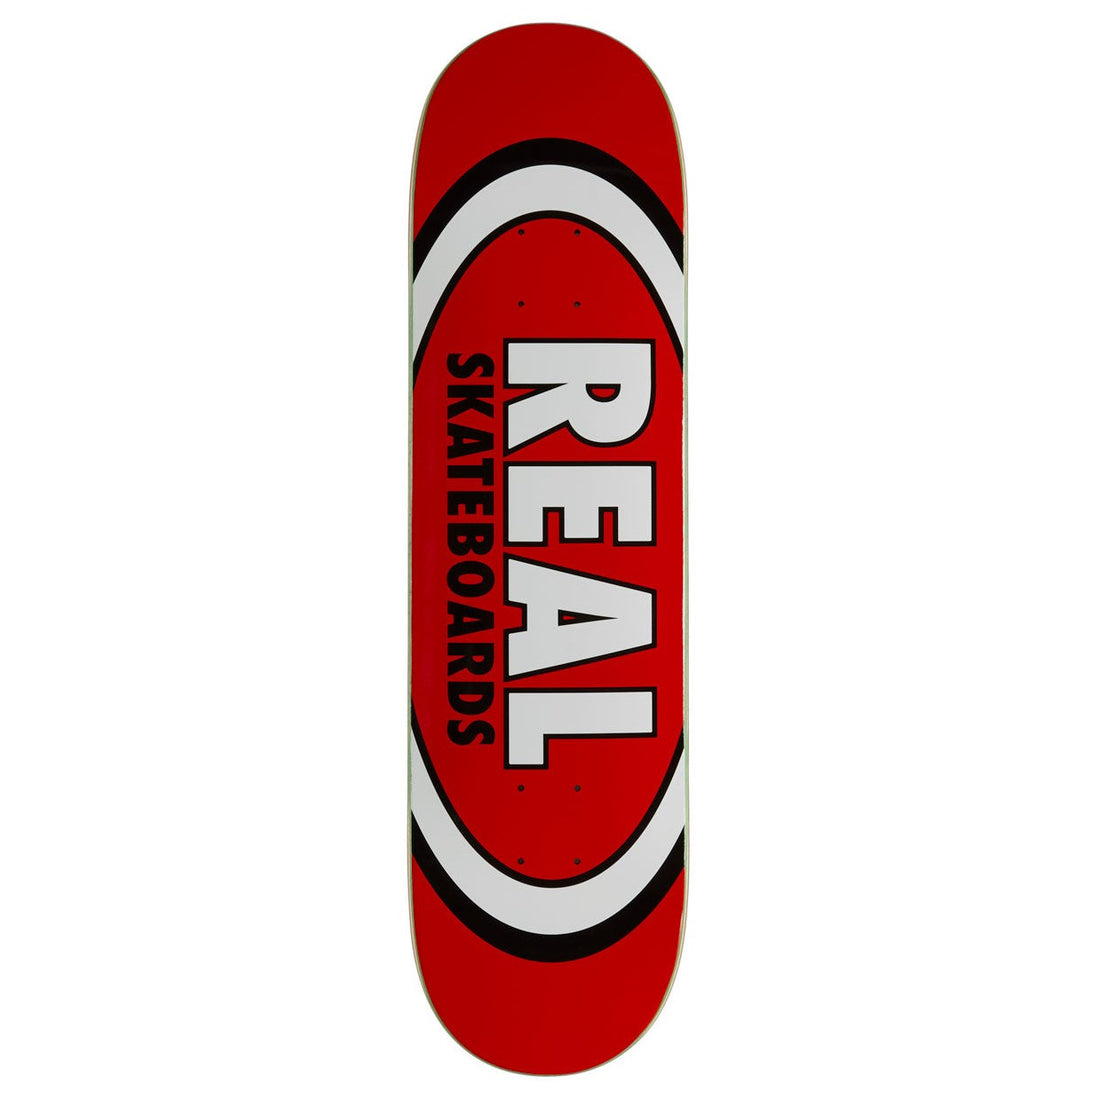 REAL TEAM CLASSIC OVAL BLACK RED DECK 8.12